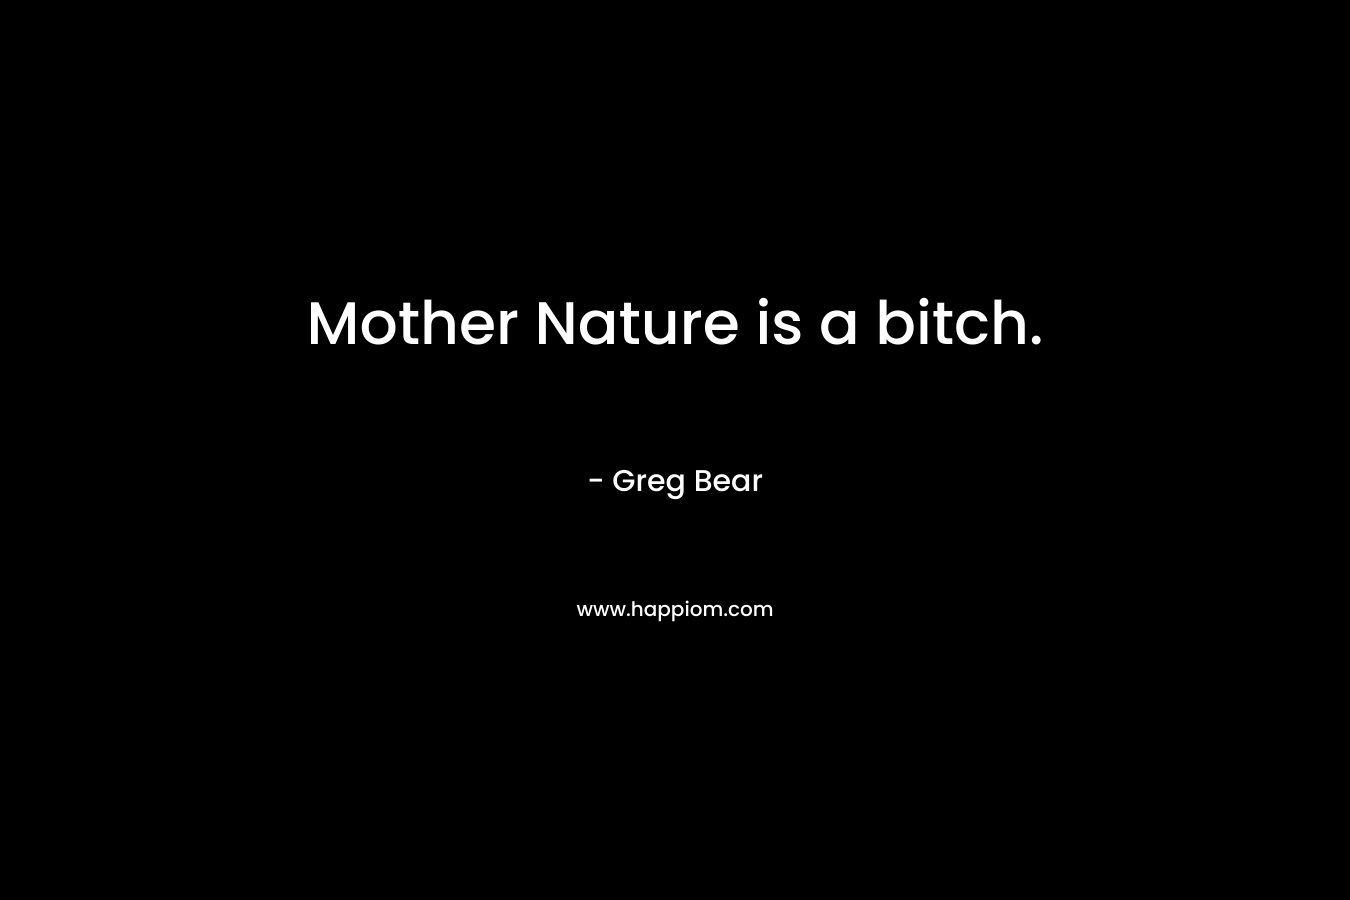 Mother Nature is a bitch. – Greg Bear